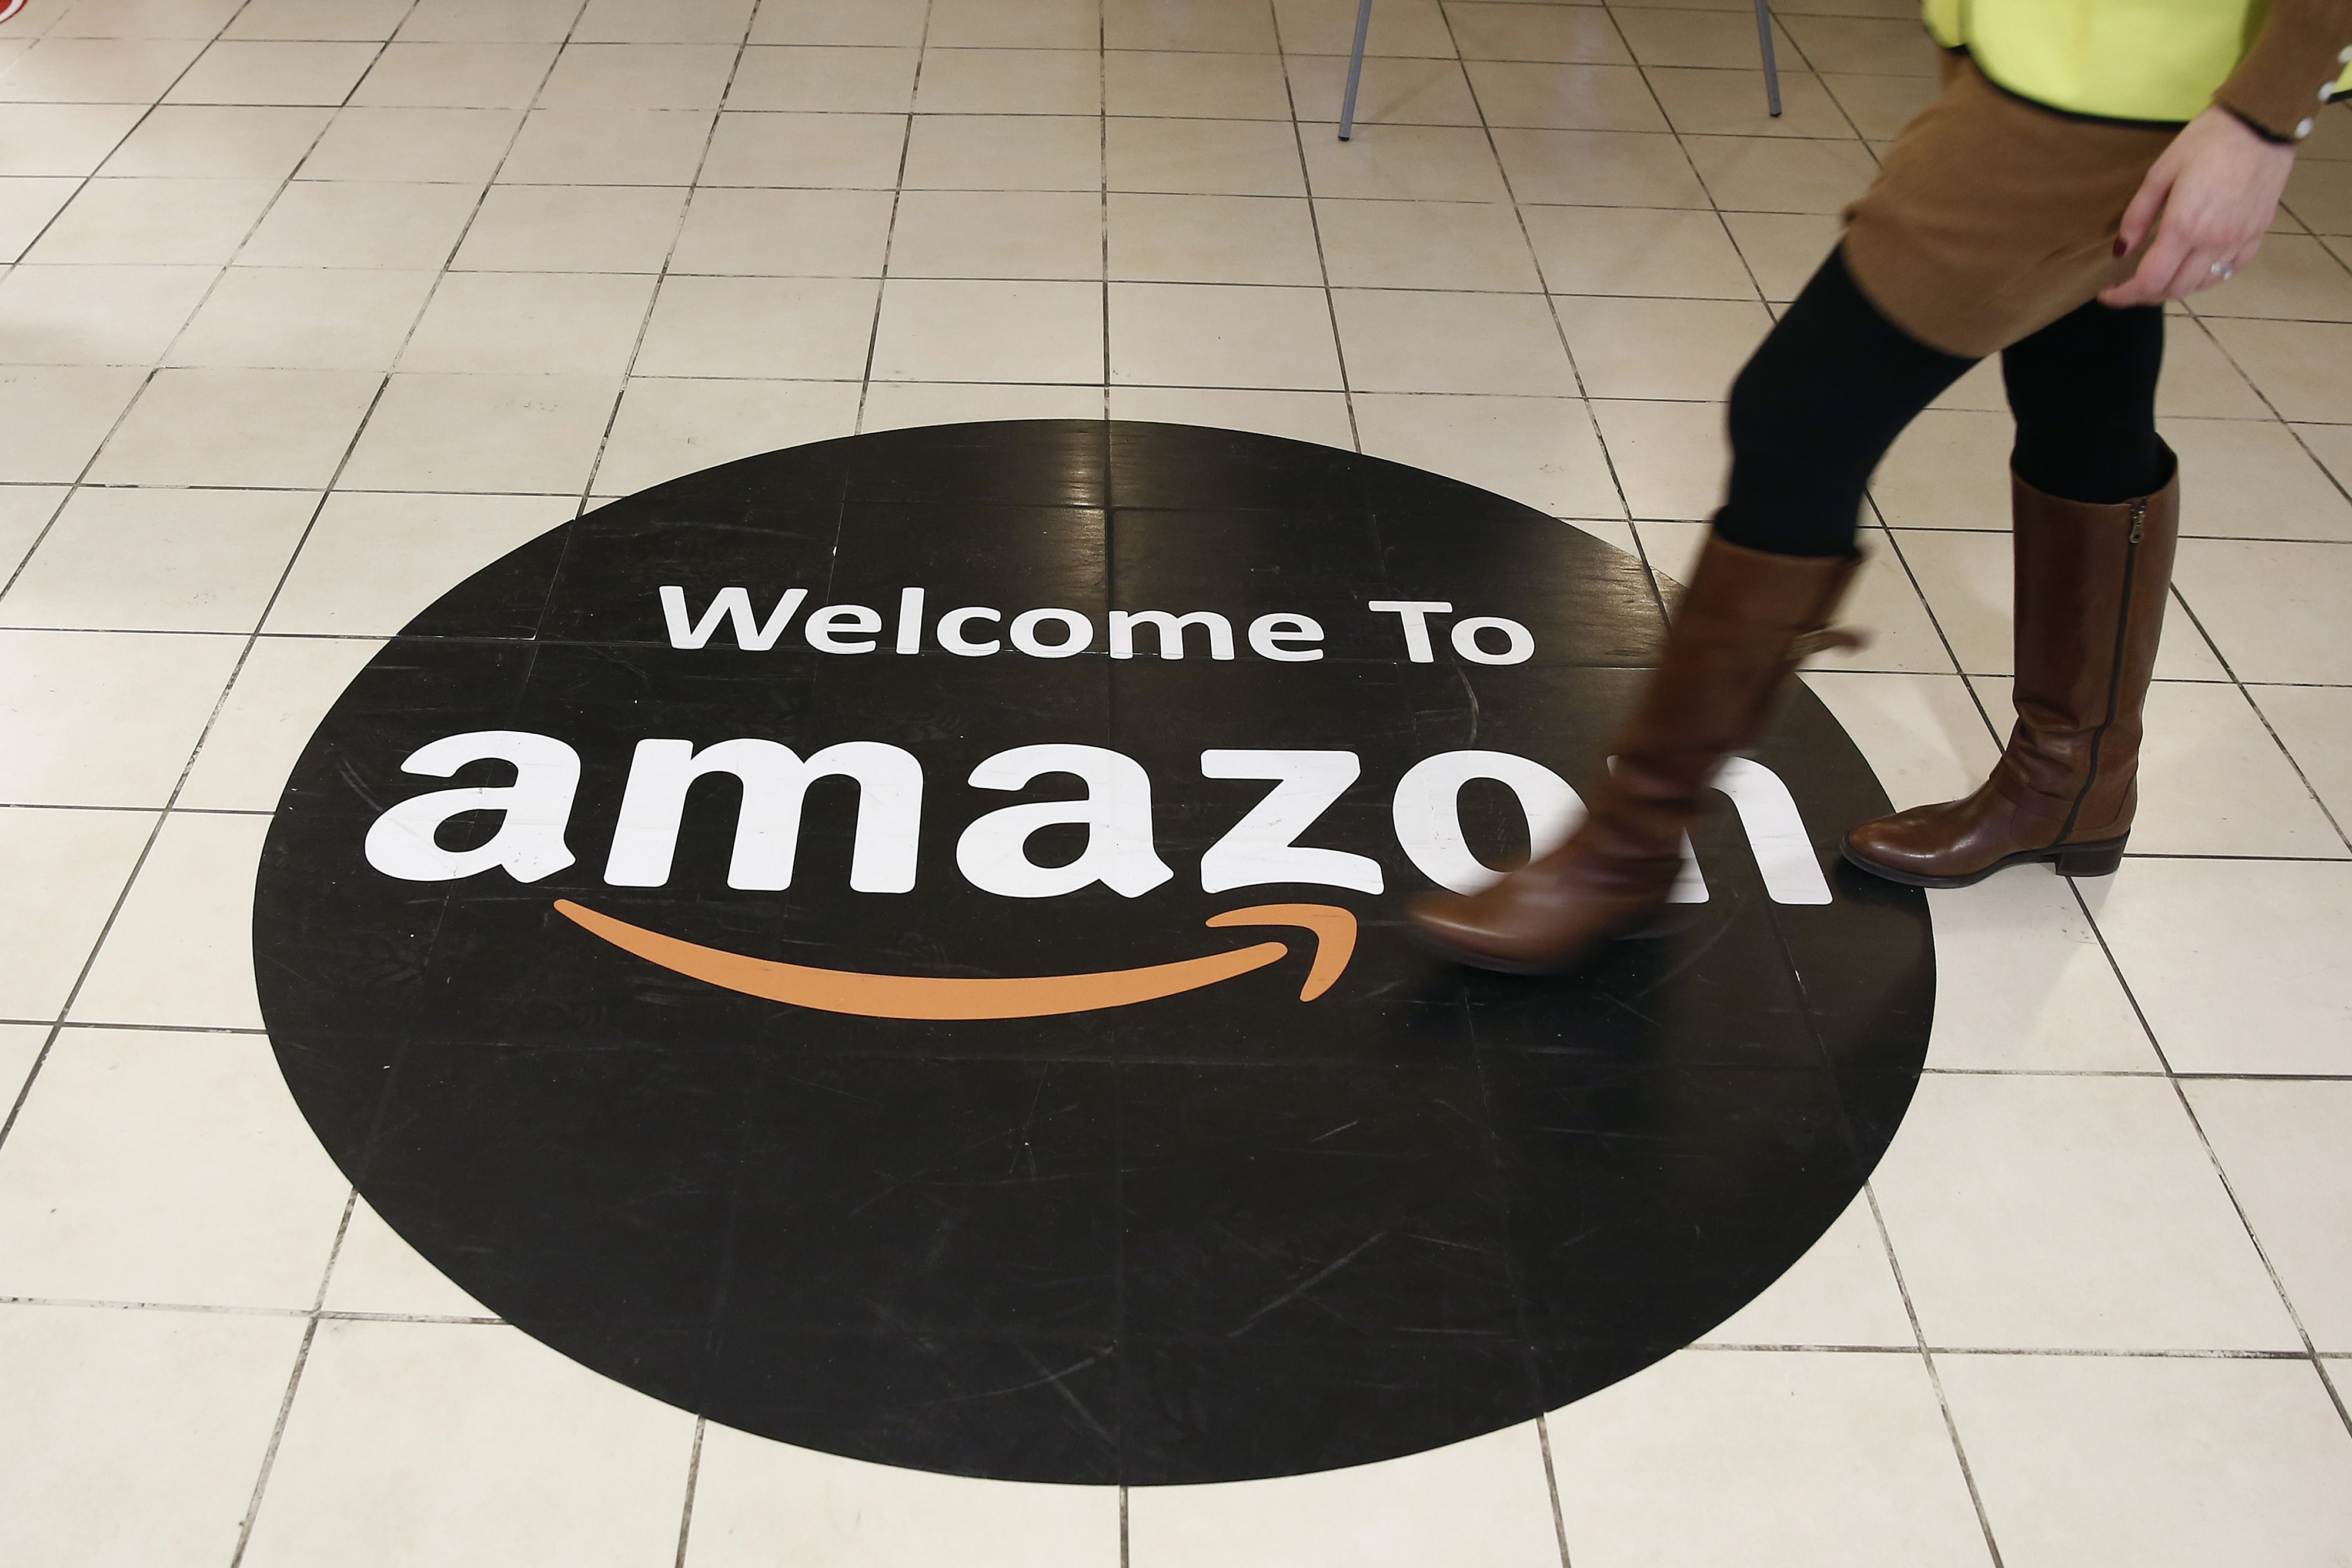 An employee walks over a logo on the floor of Amazon's fulfillment centers in Rugeley, U.K., on Dec. 2, 2013 (Bloomberg—Bloomberg via Getty Images)